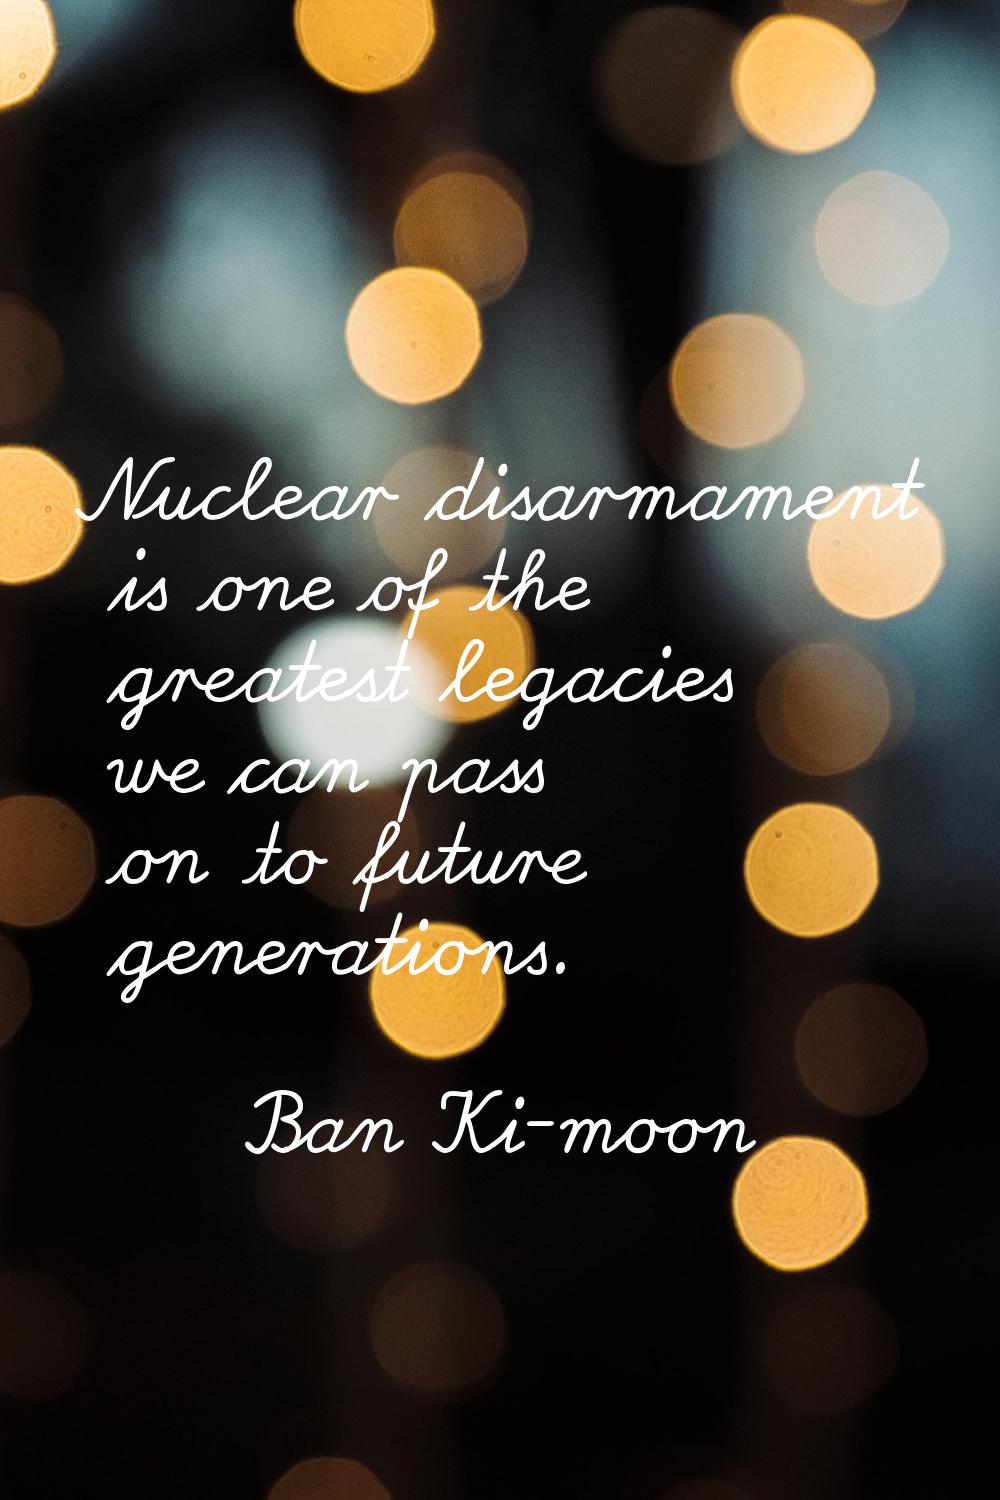 Nuclear disarmament is one of the greatest legacies we can pass on to future generations.